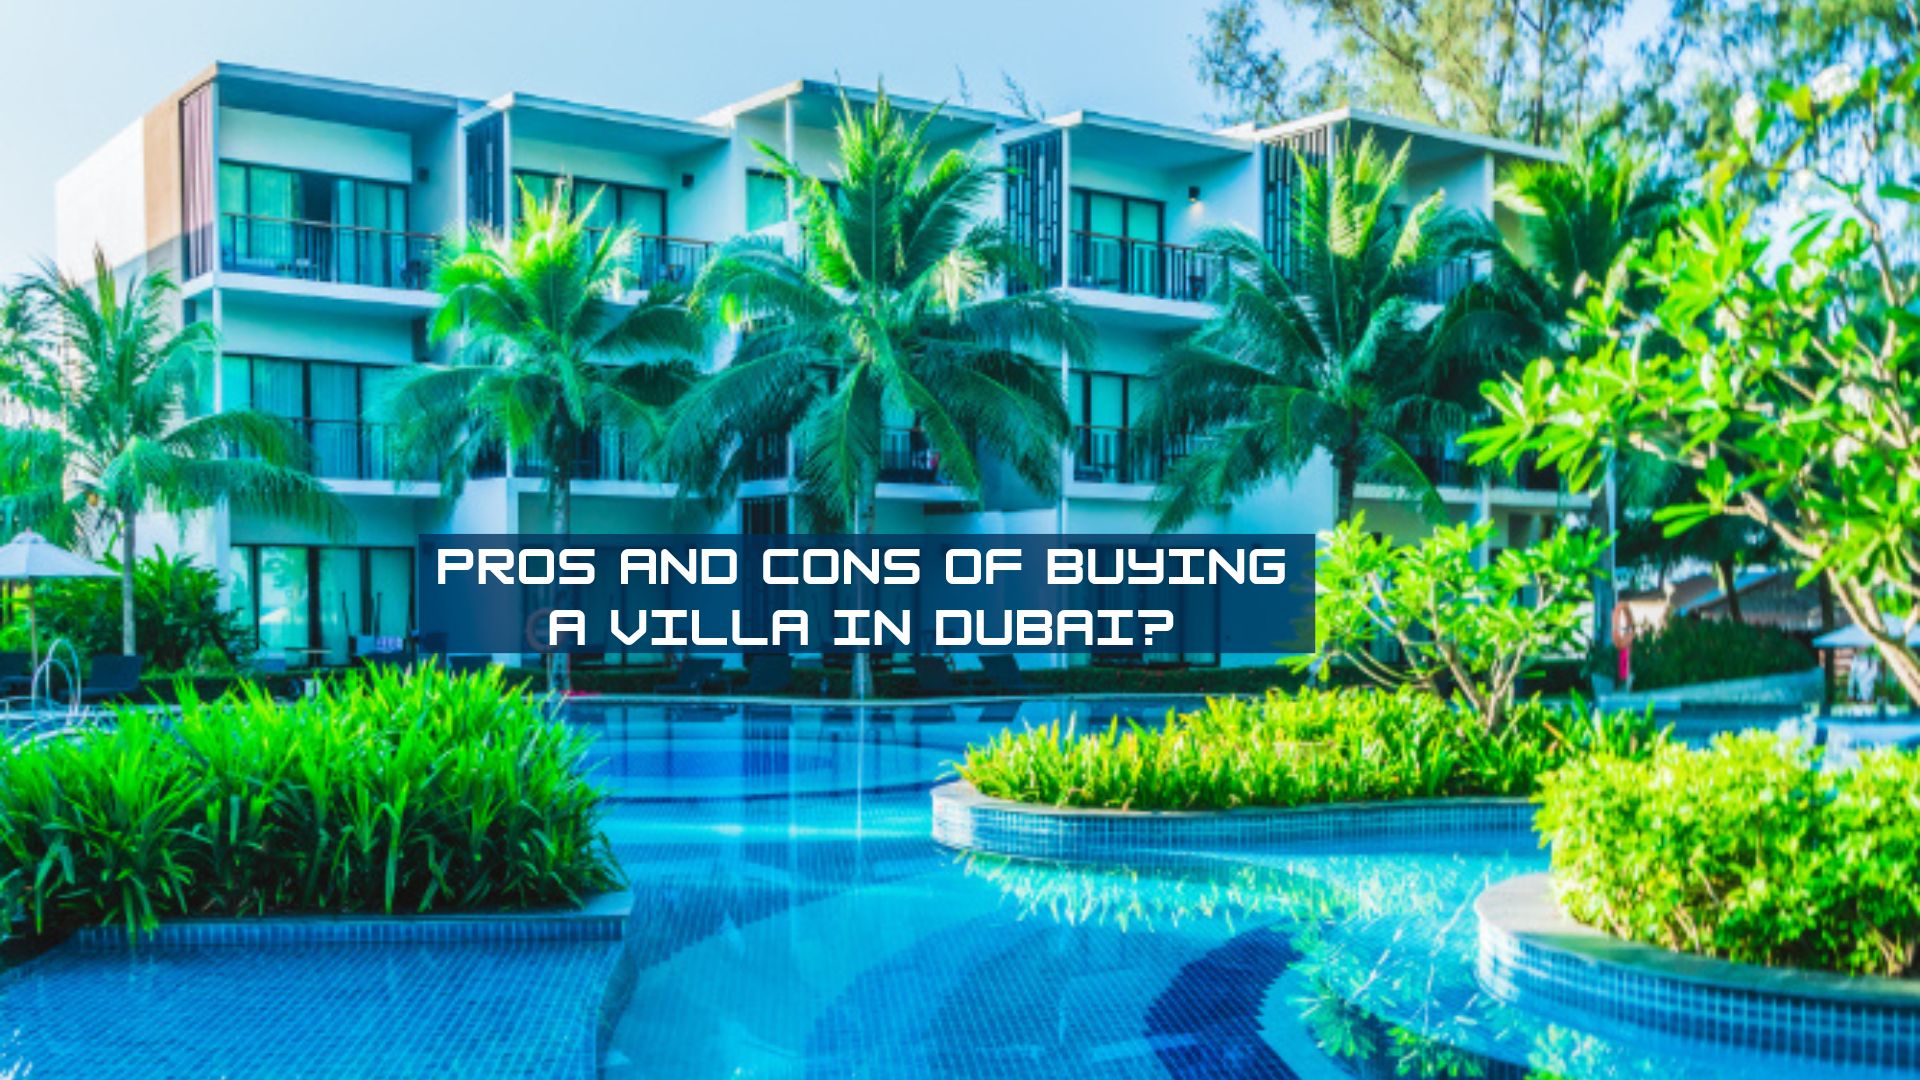 Dubai Villas: Dream Home or Investment Minefield? Weighing the Pros and Cons